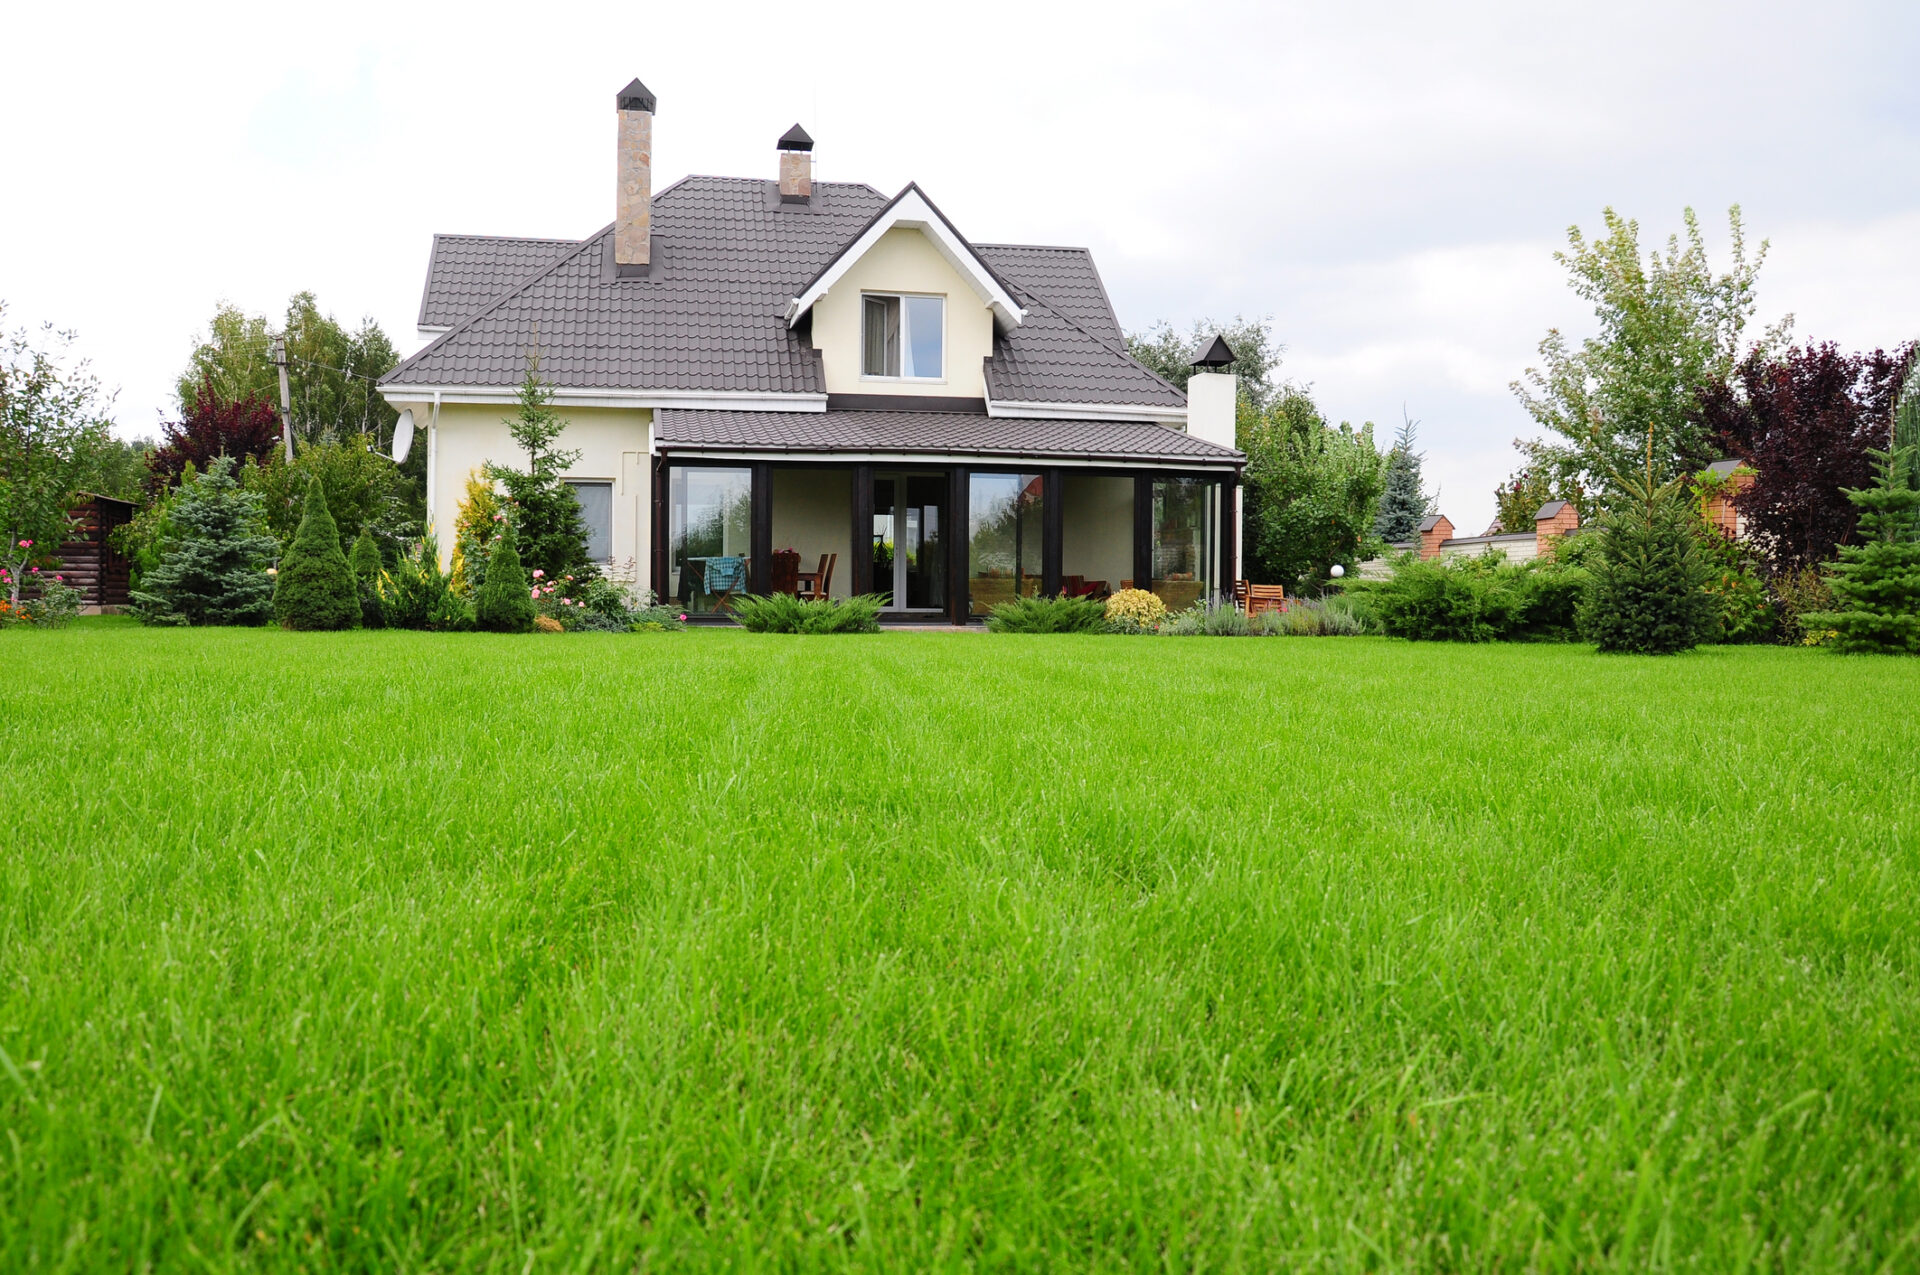 This image shows a modern two-story house with a dark shingled roof, large windows, a green lawn, and an assortment of plants and trees.